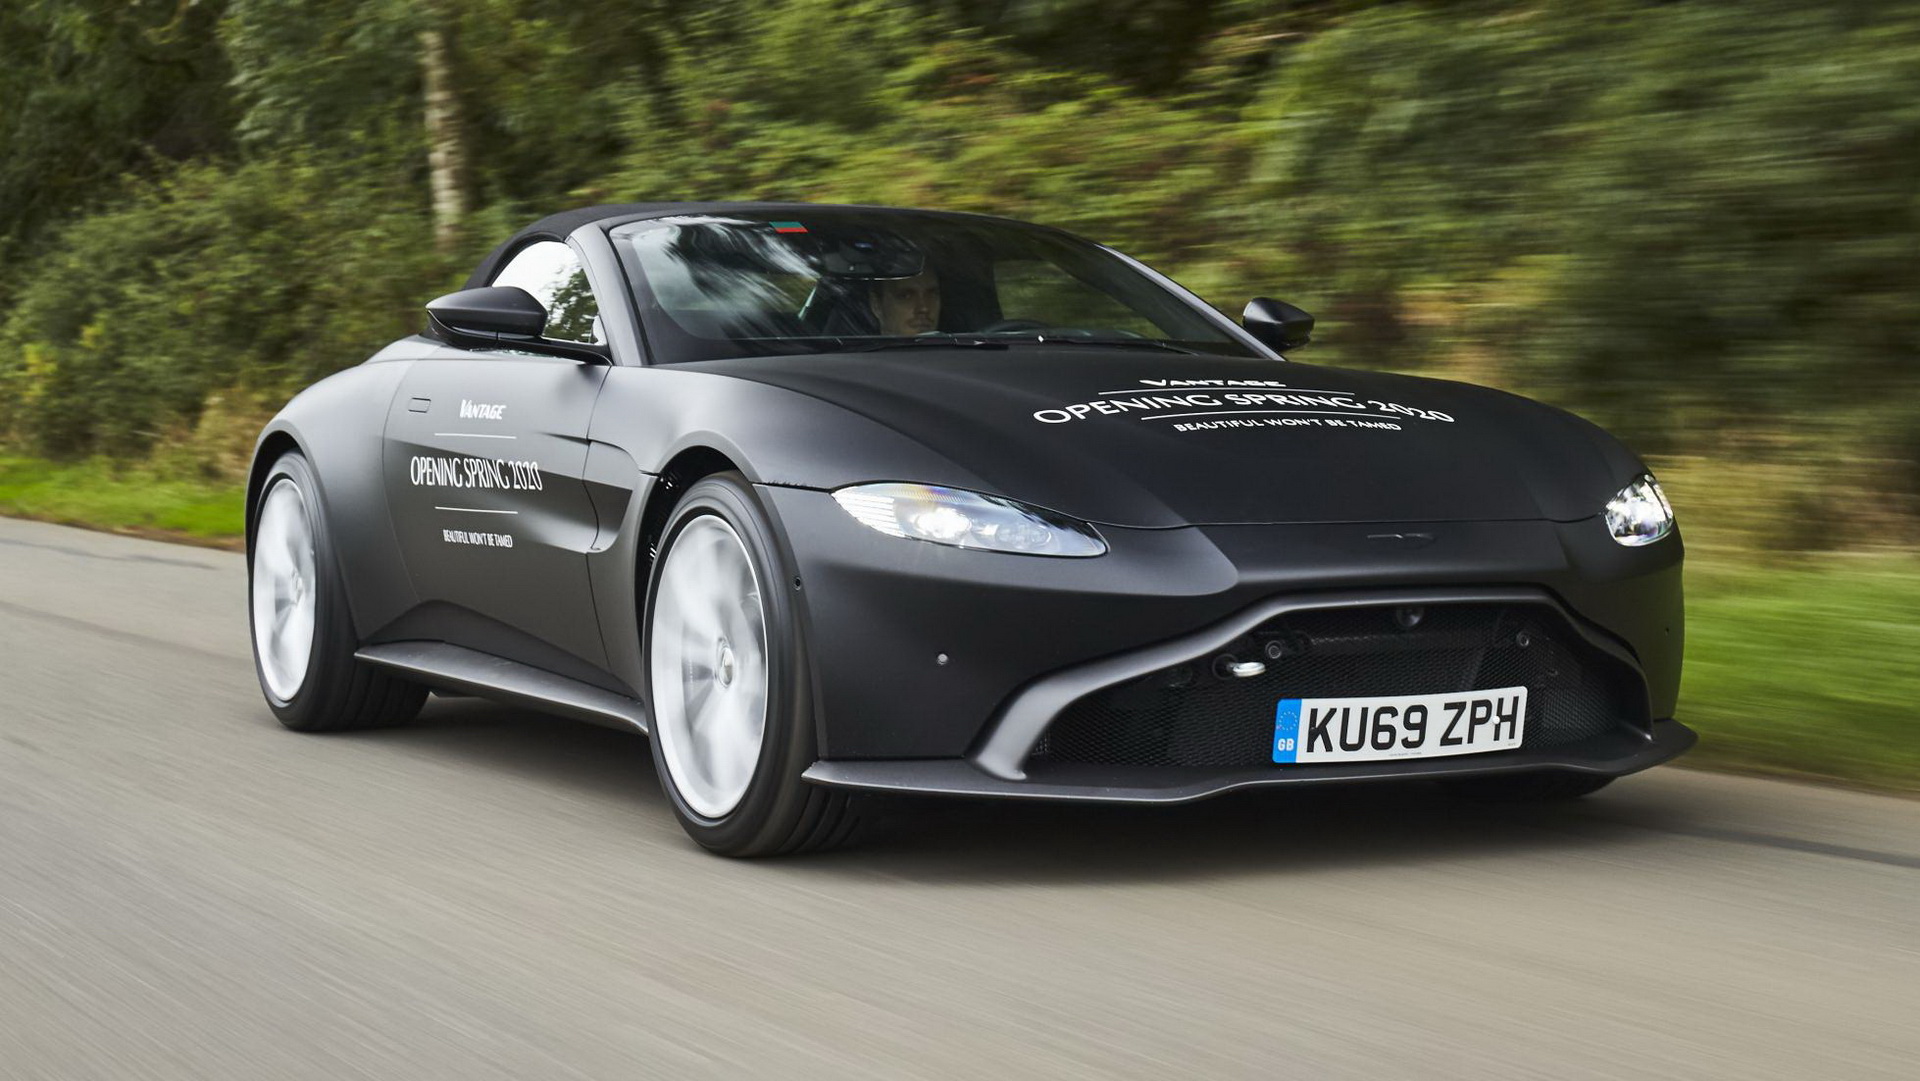 2020 Aston Martin Vantage Roadster Shown In First Official